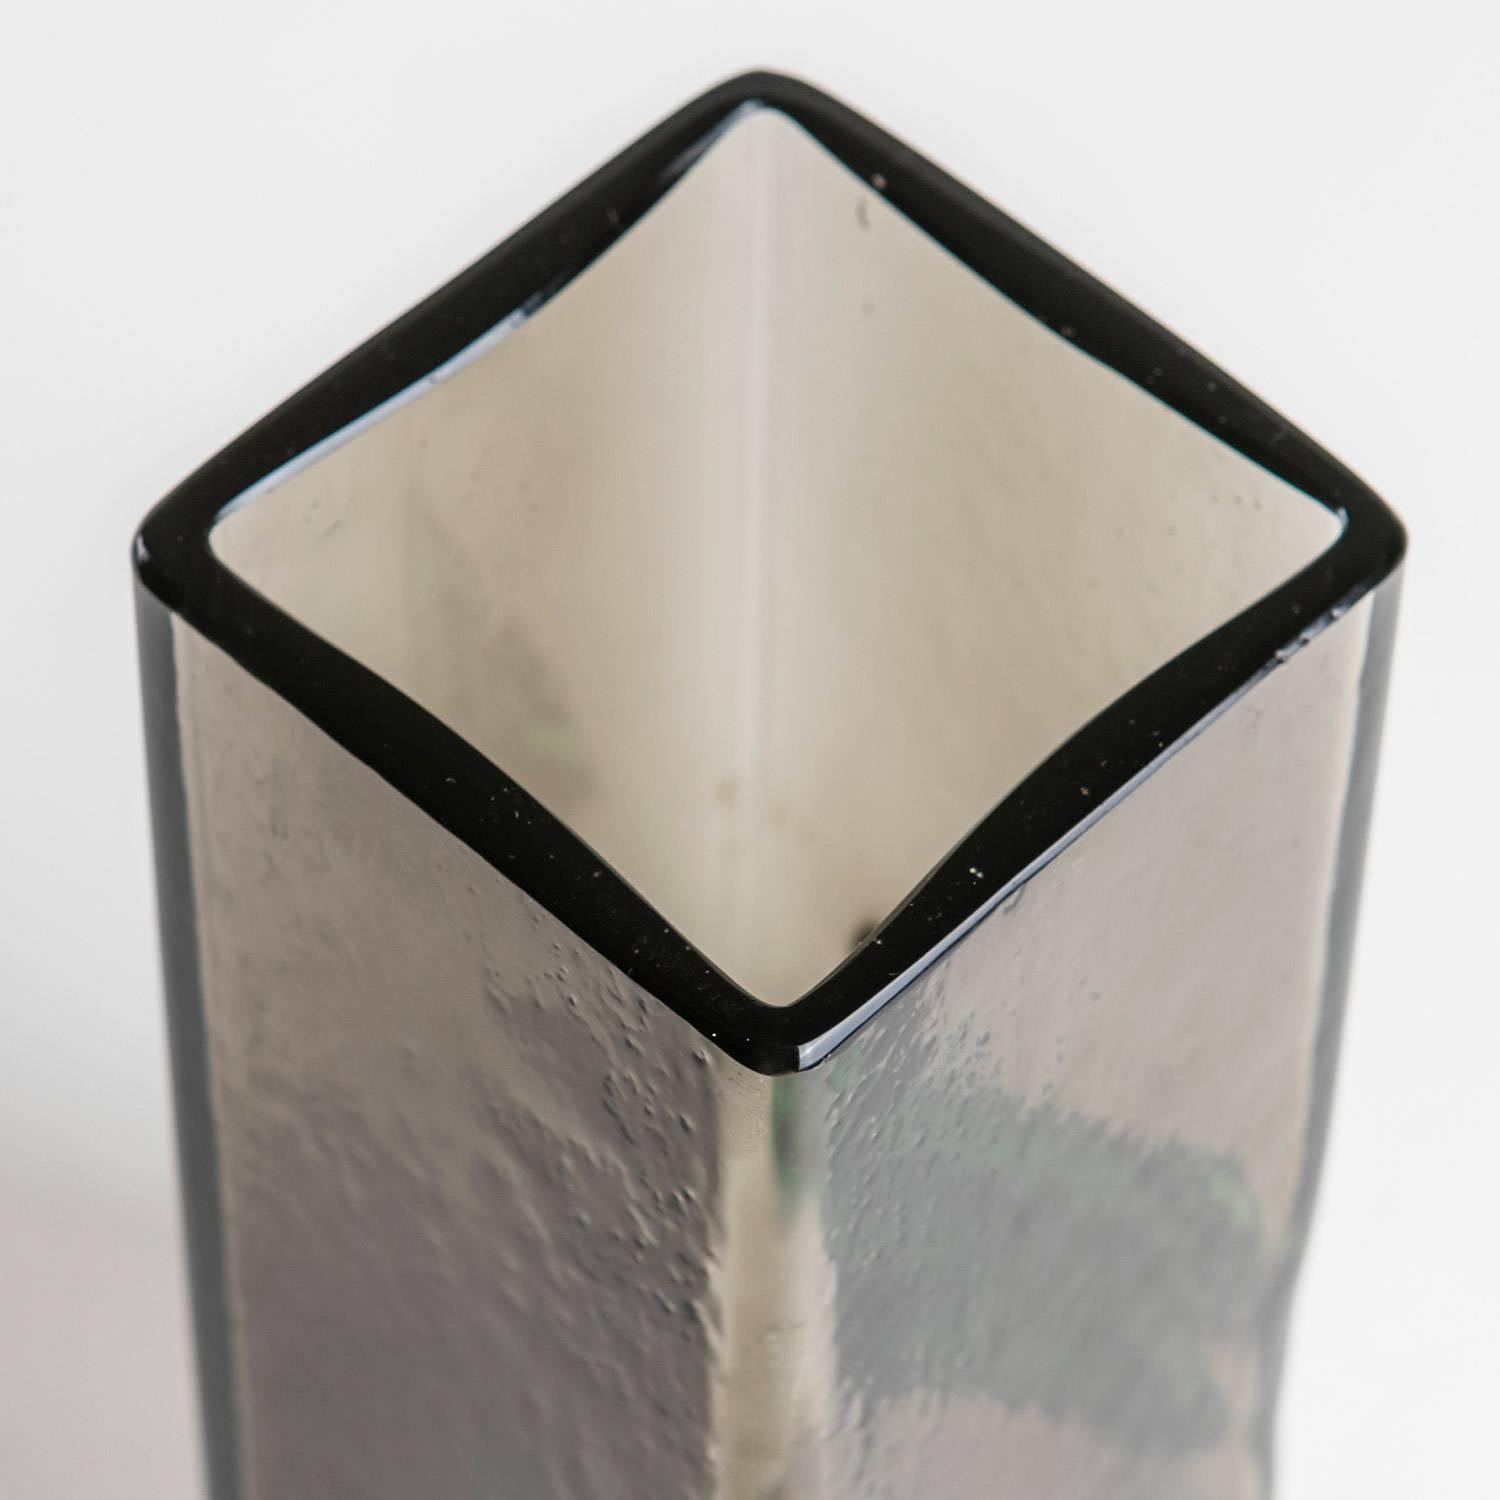 Remarkable vase by Pierre Cardin.
Small quatrefoil green glass decoration on one side and signature behind it.